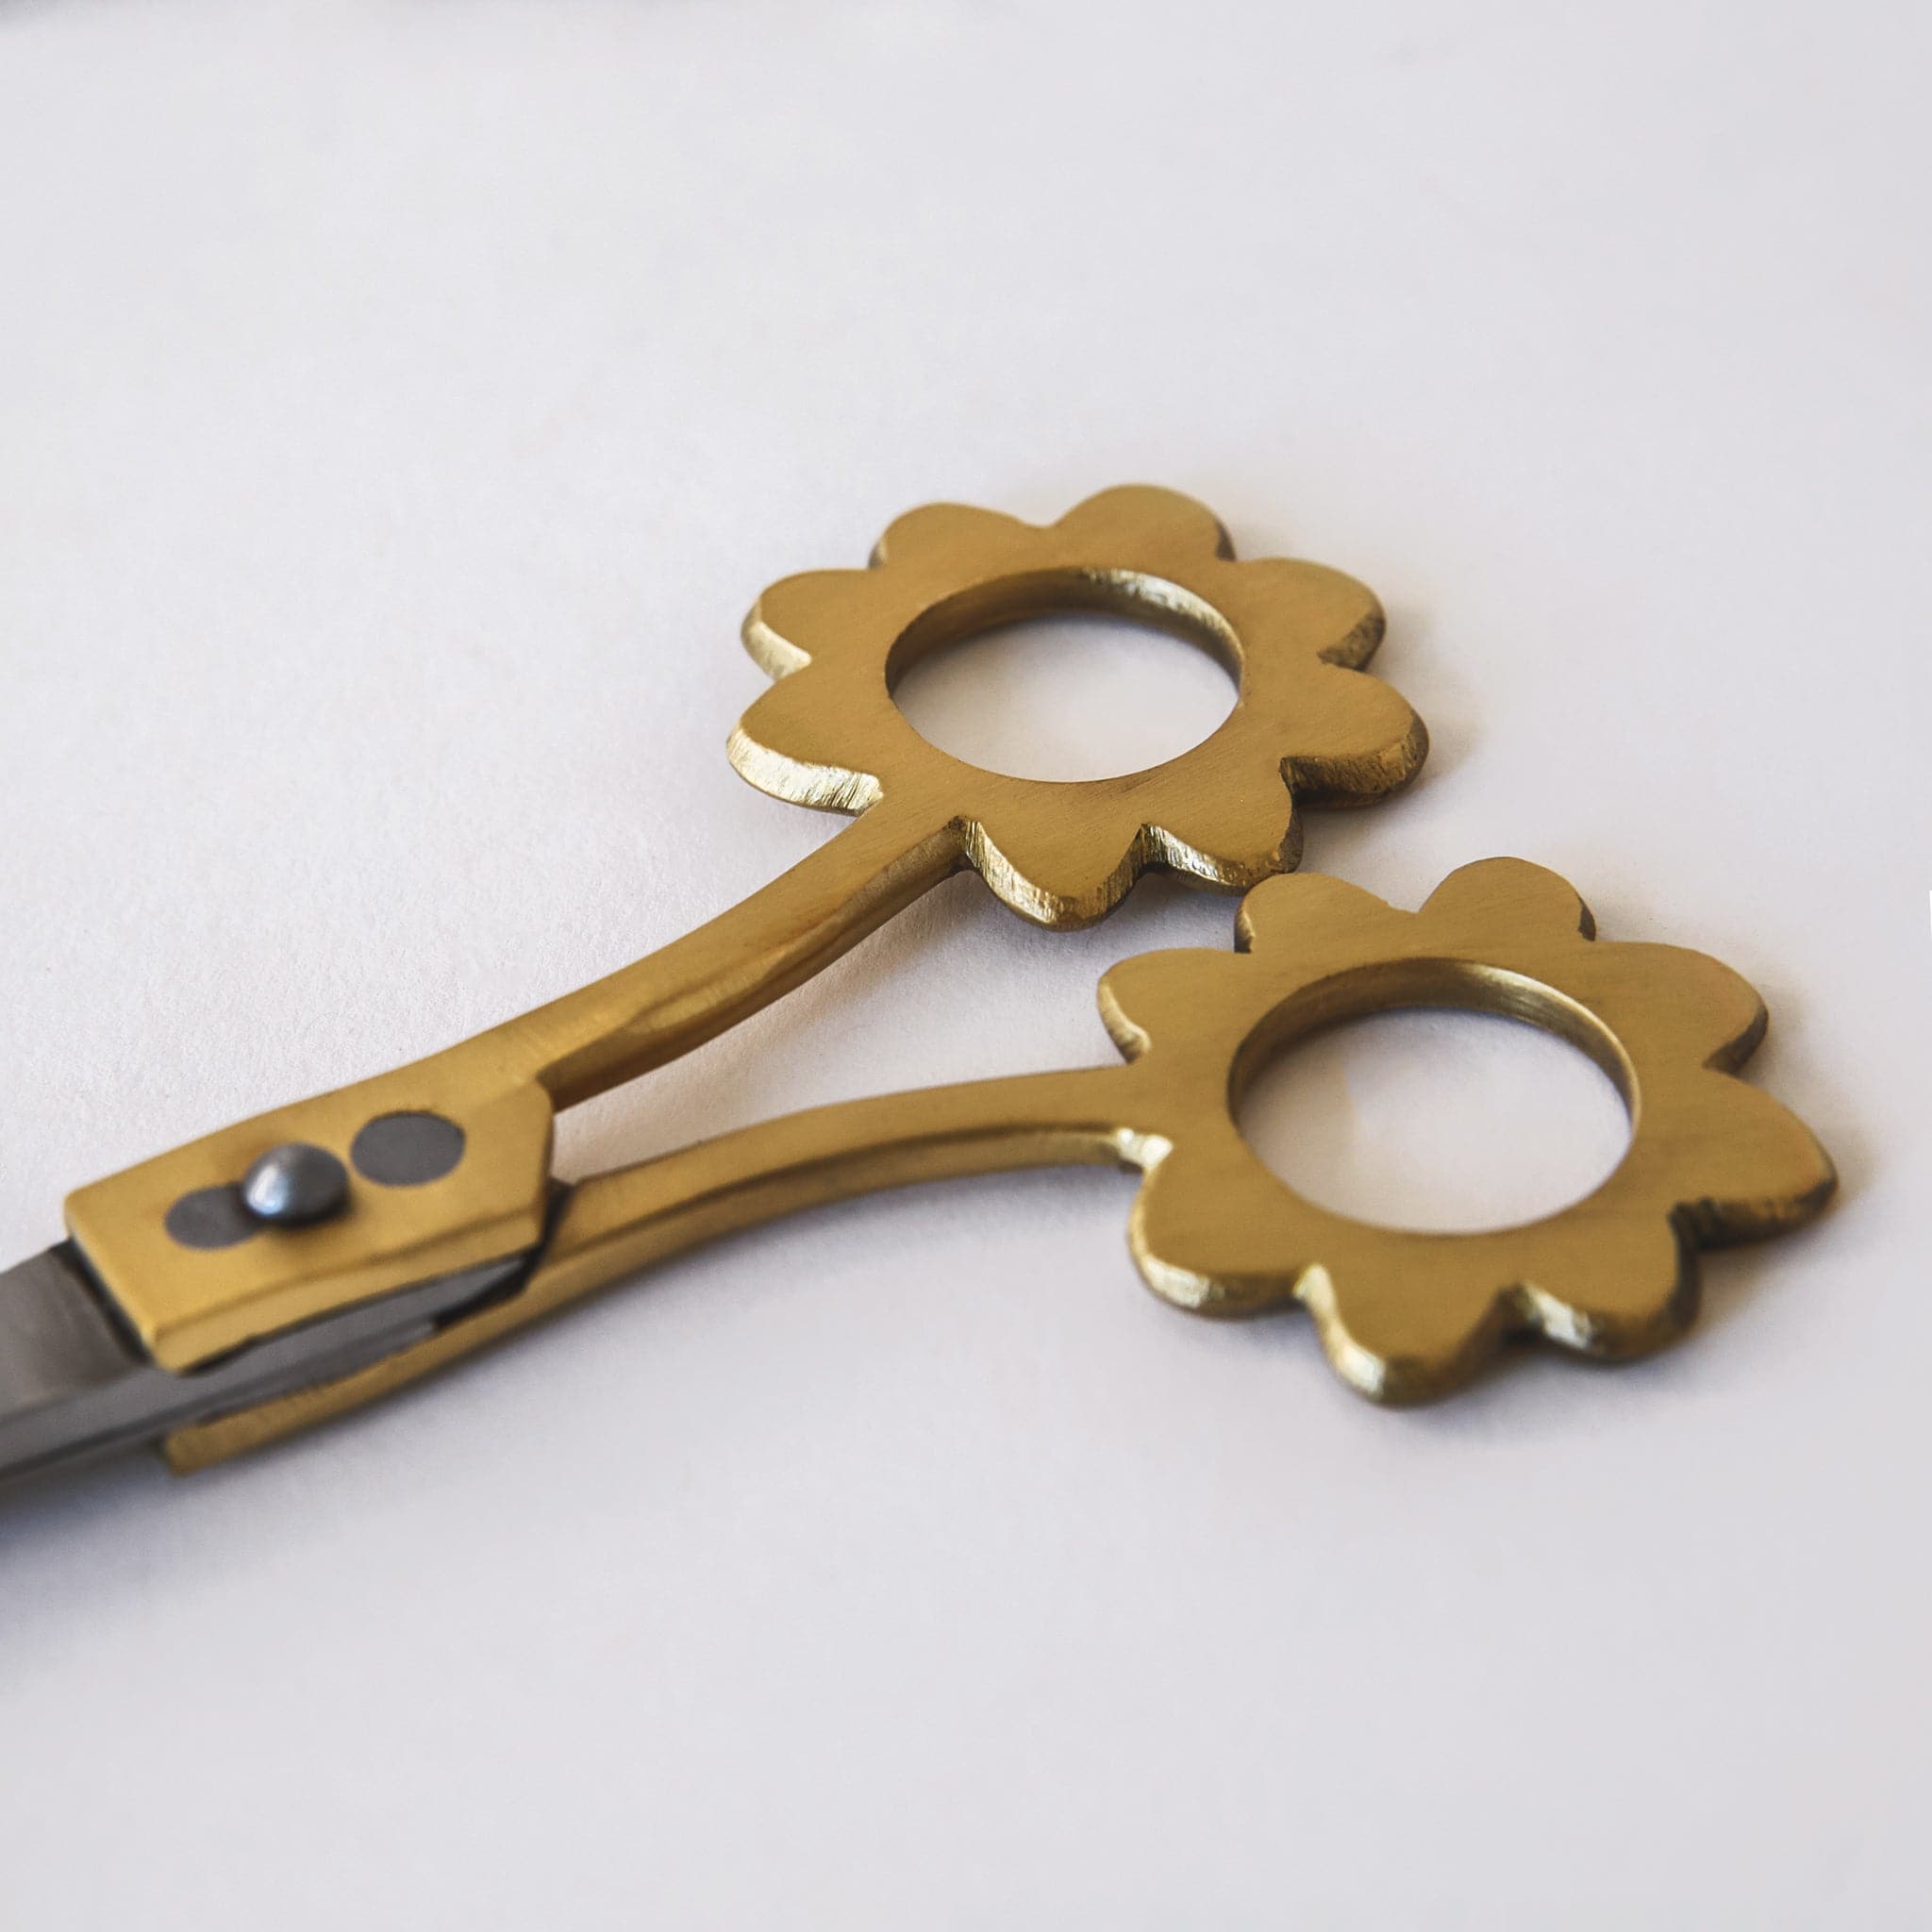 These scissors have stainless steel blades and brass handles. The holes to place your fingers through are in the shape of flowers.